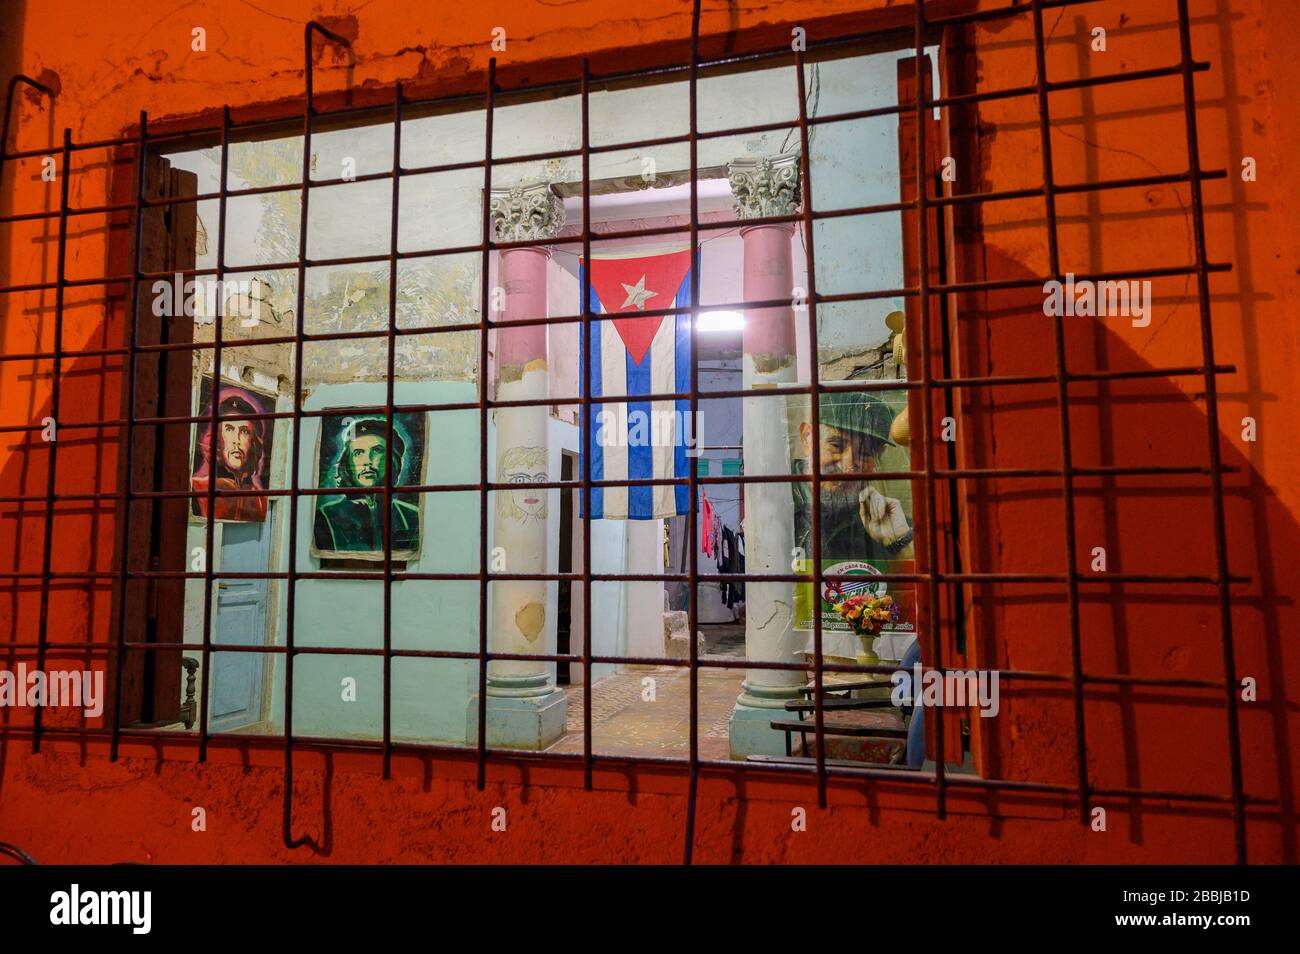 Interior view from the street, with images of Che Guevera and Fidell Castro, Havana Vieja,  Cuba Stock Photo